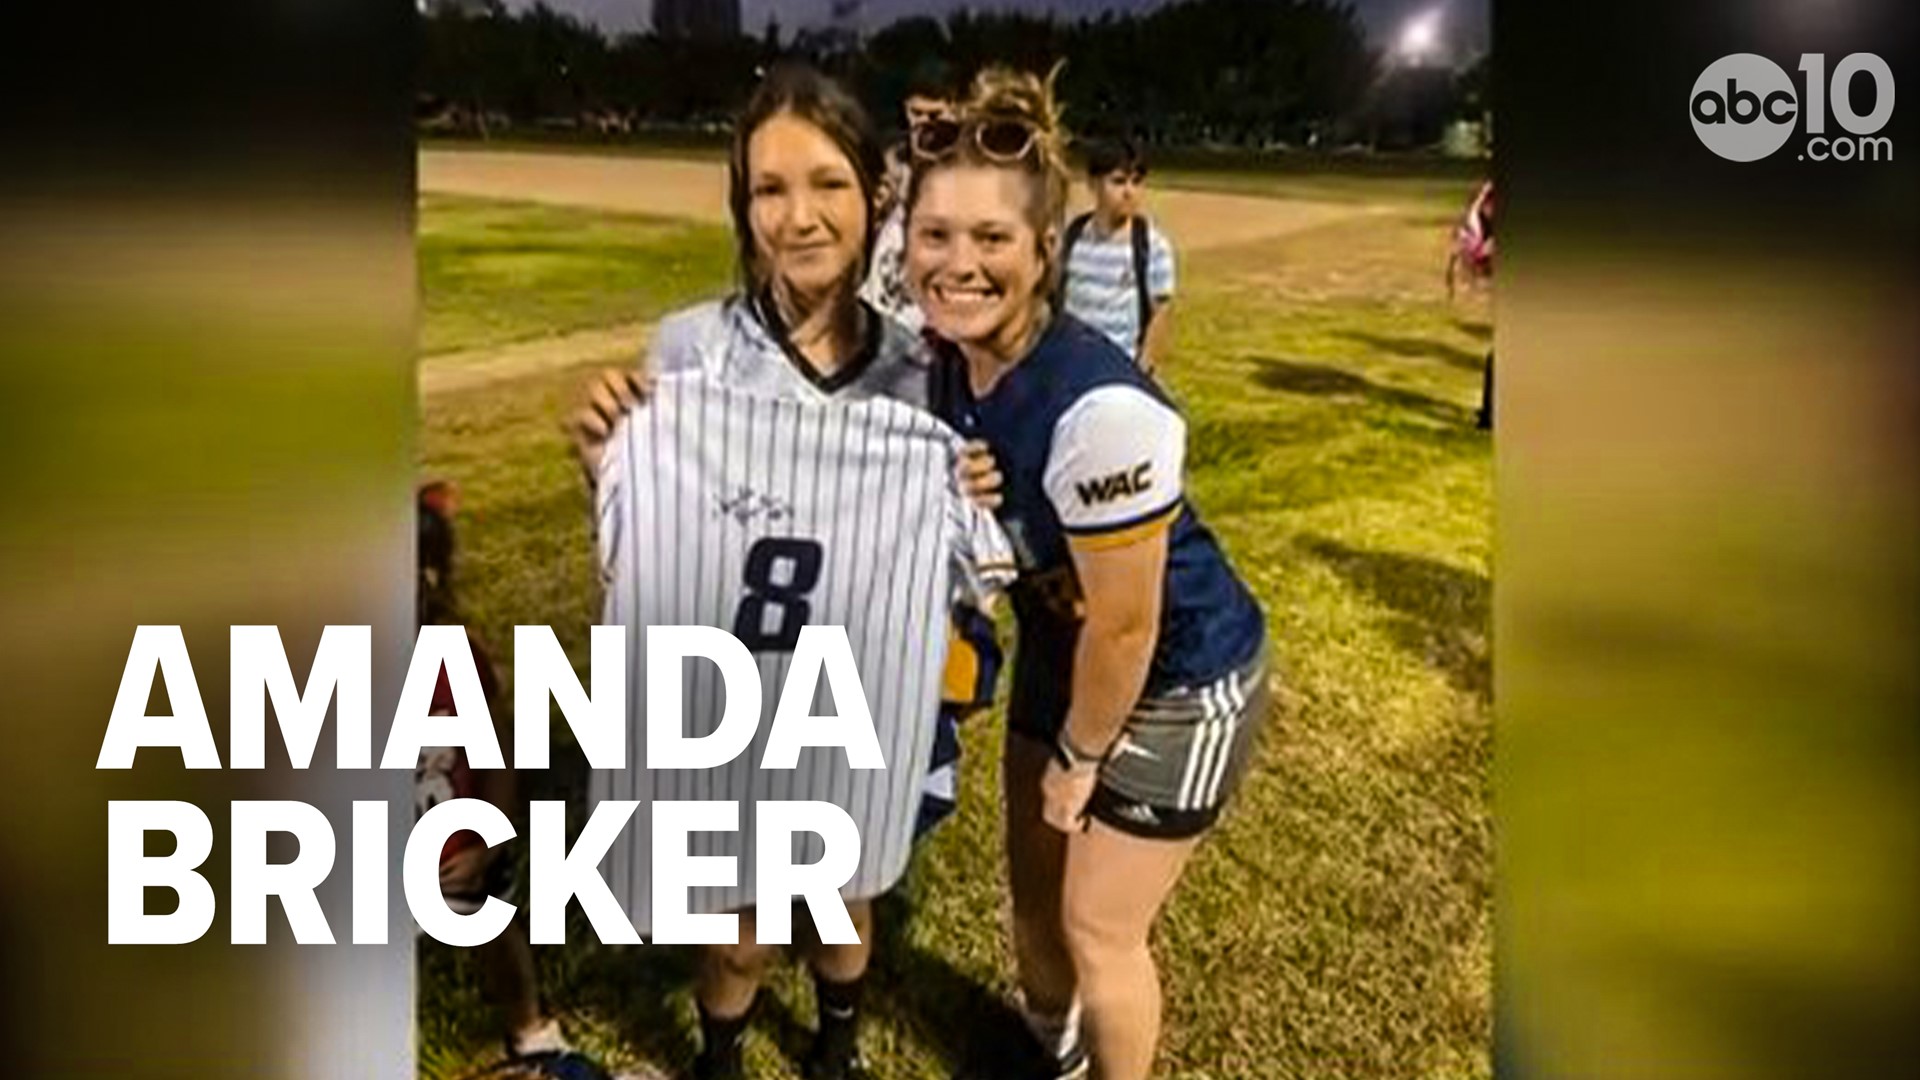 Excelling at softball at Oakdale High School in her youth, Amanda Bricker was determined to head to the next level, now she wants to help others who are deaf.